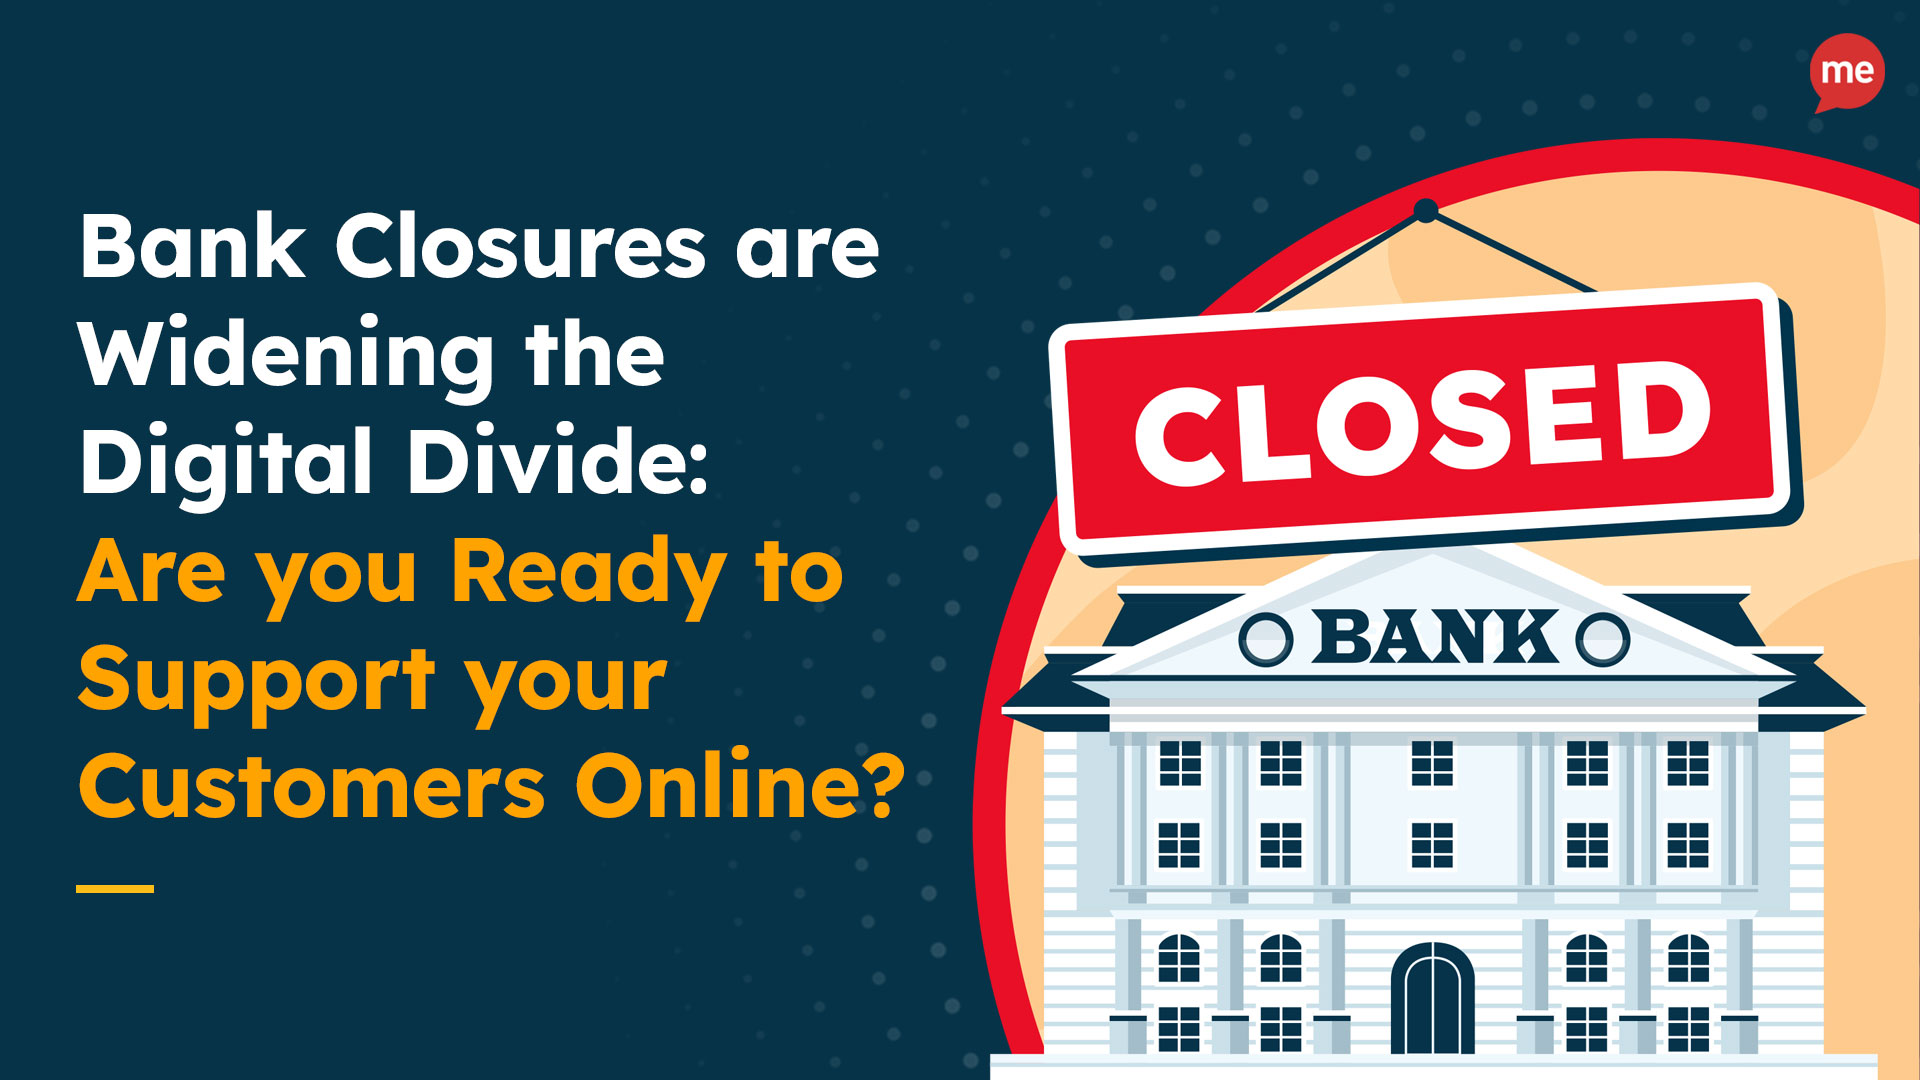 Bank Closures are Widening the Digital Divide: Are you Ready to Support your Customers Online?